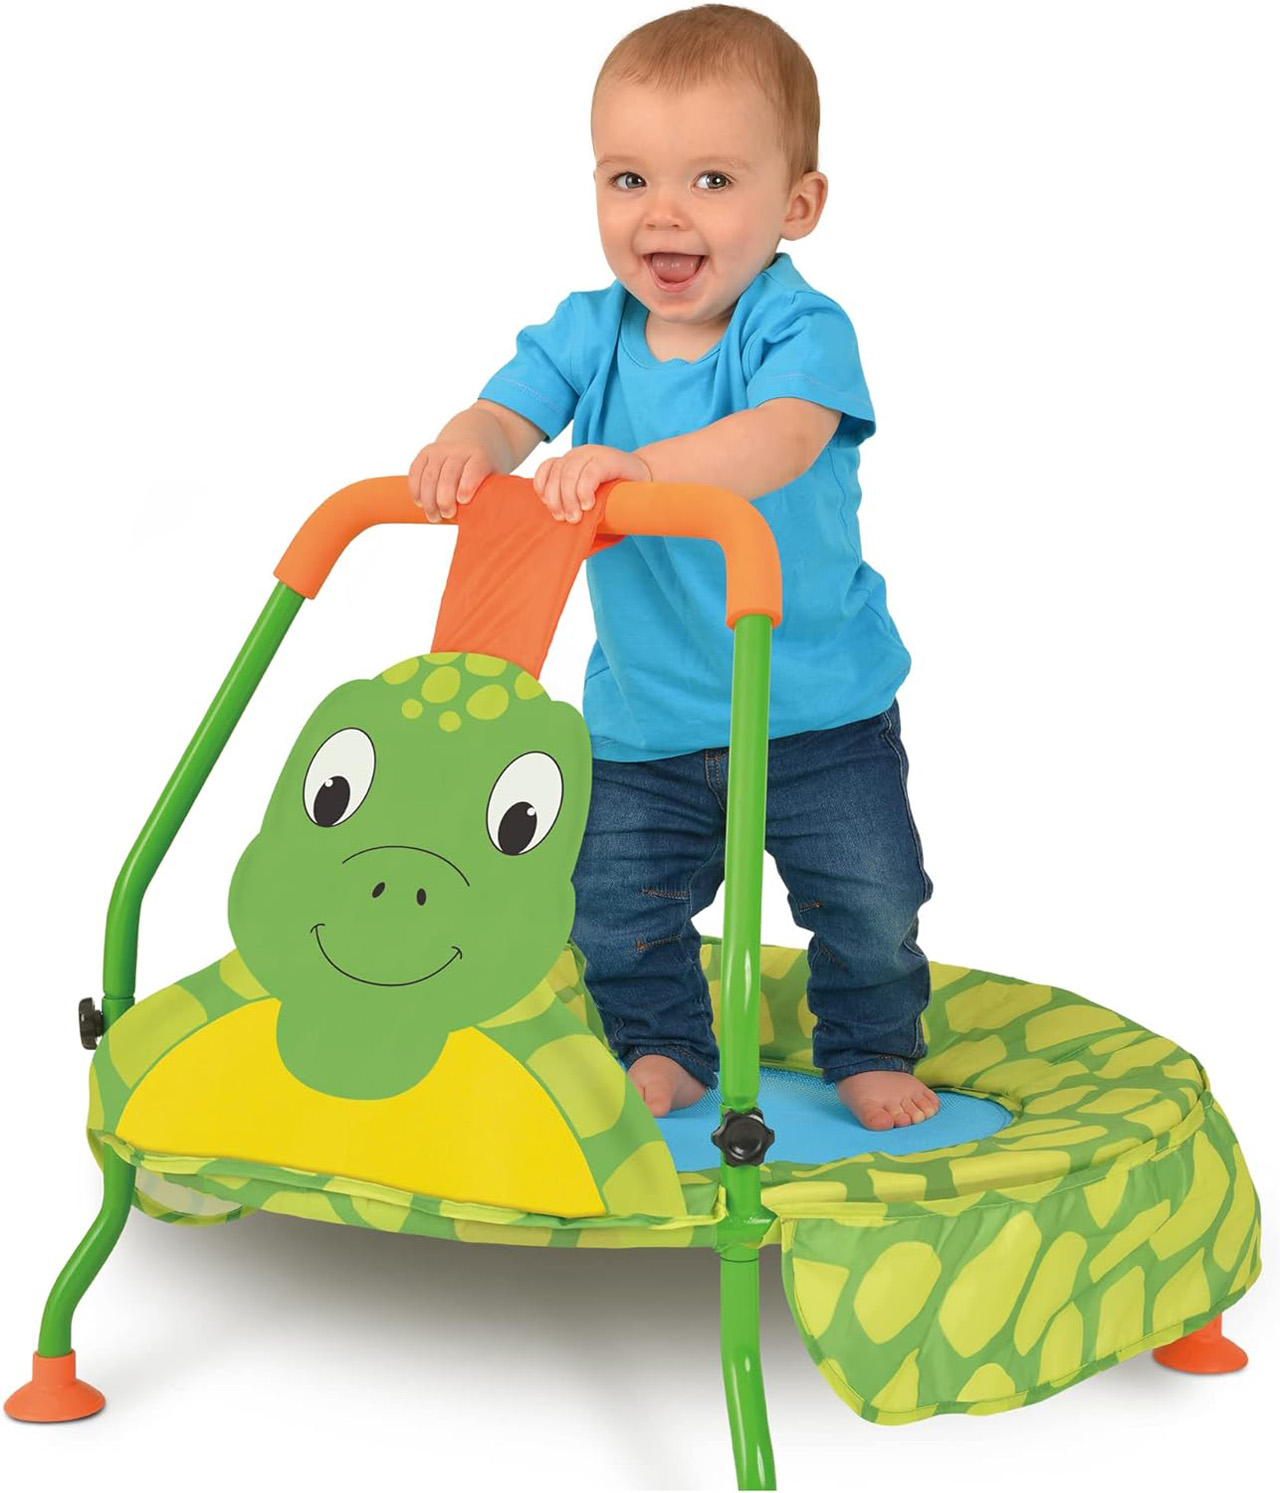 Galt Toys, Nursery Trampoline – Turtle, Trampolines for Kids, Ages 1 Year Plus